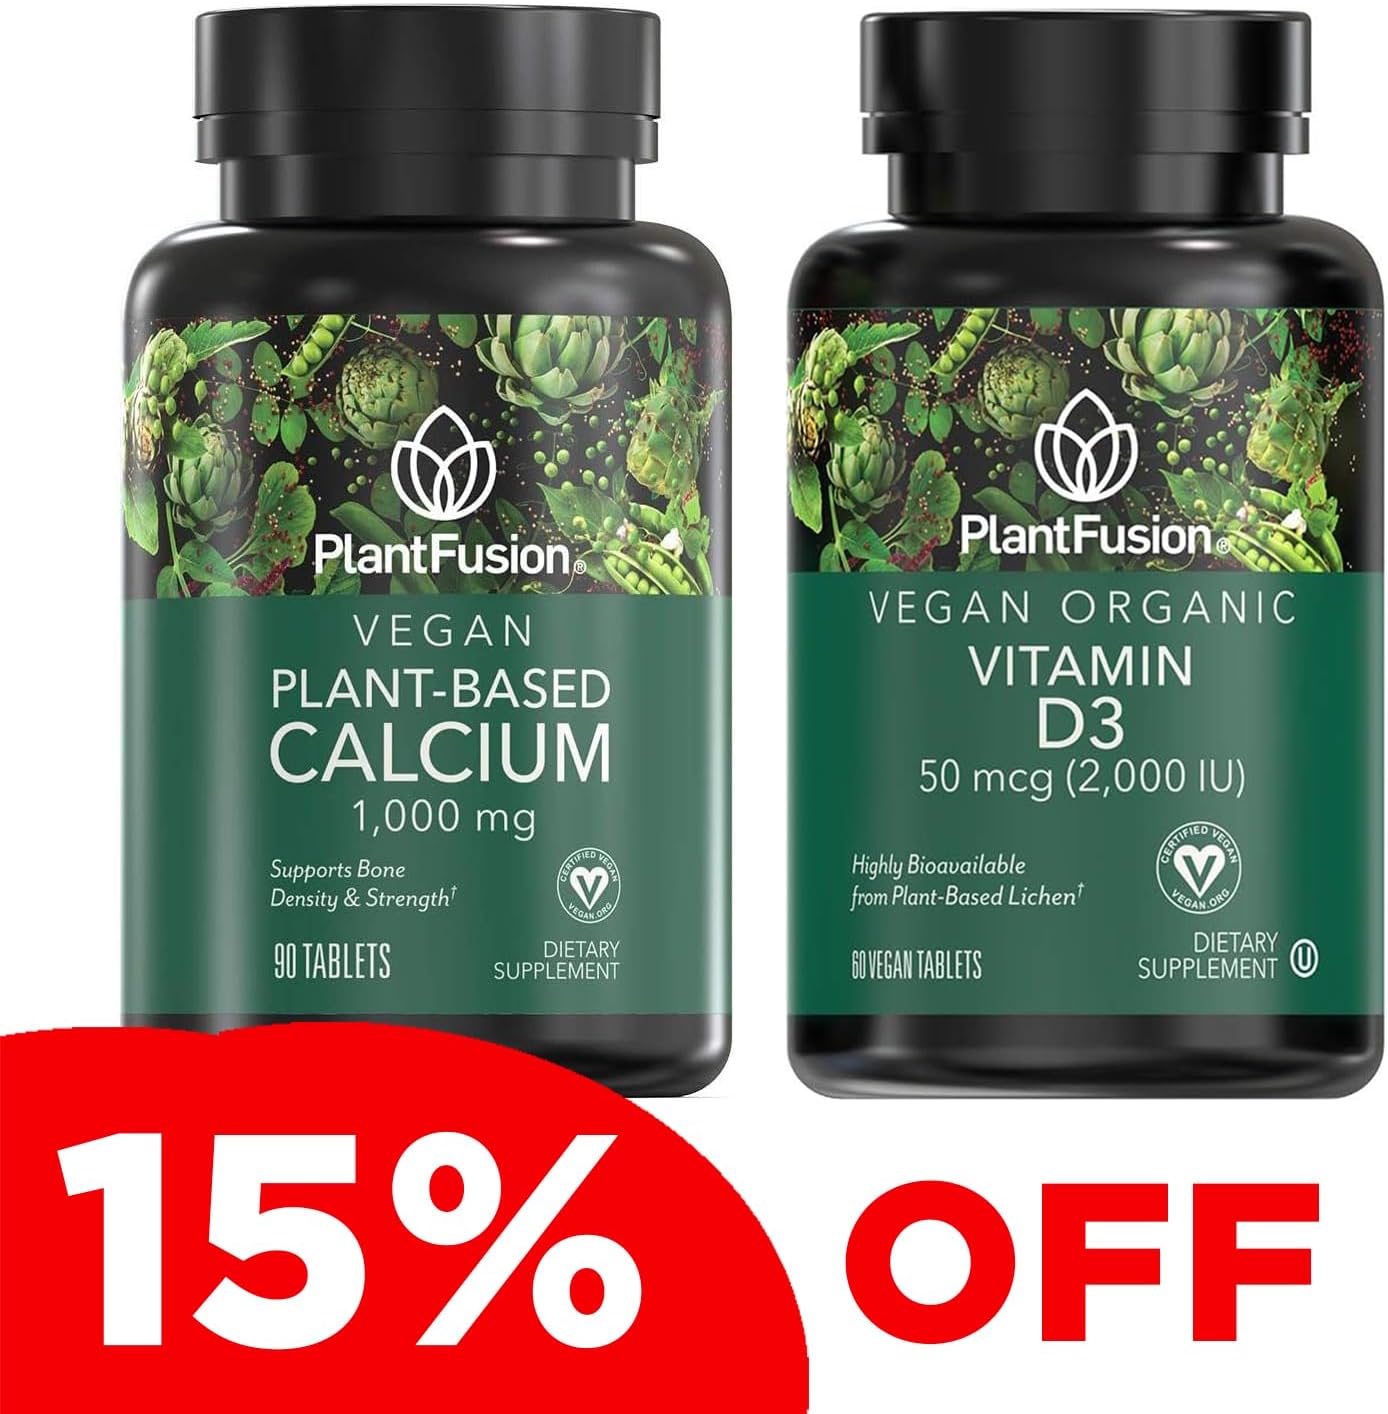 PlantFusion Vegan Calcium & D3 Bundle - Premium Plant Based Calcium 1000mg and D3 2000IU Supplements for Bone Growth, Density, and Strength & Immune Support